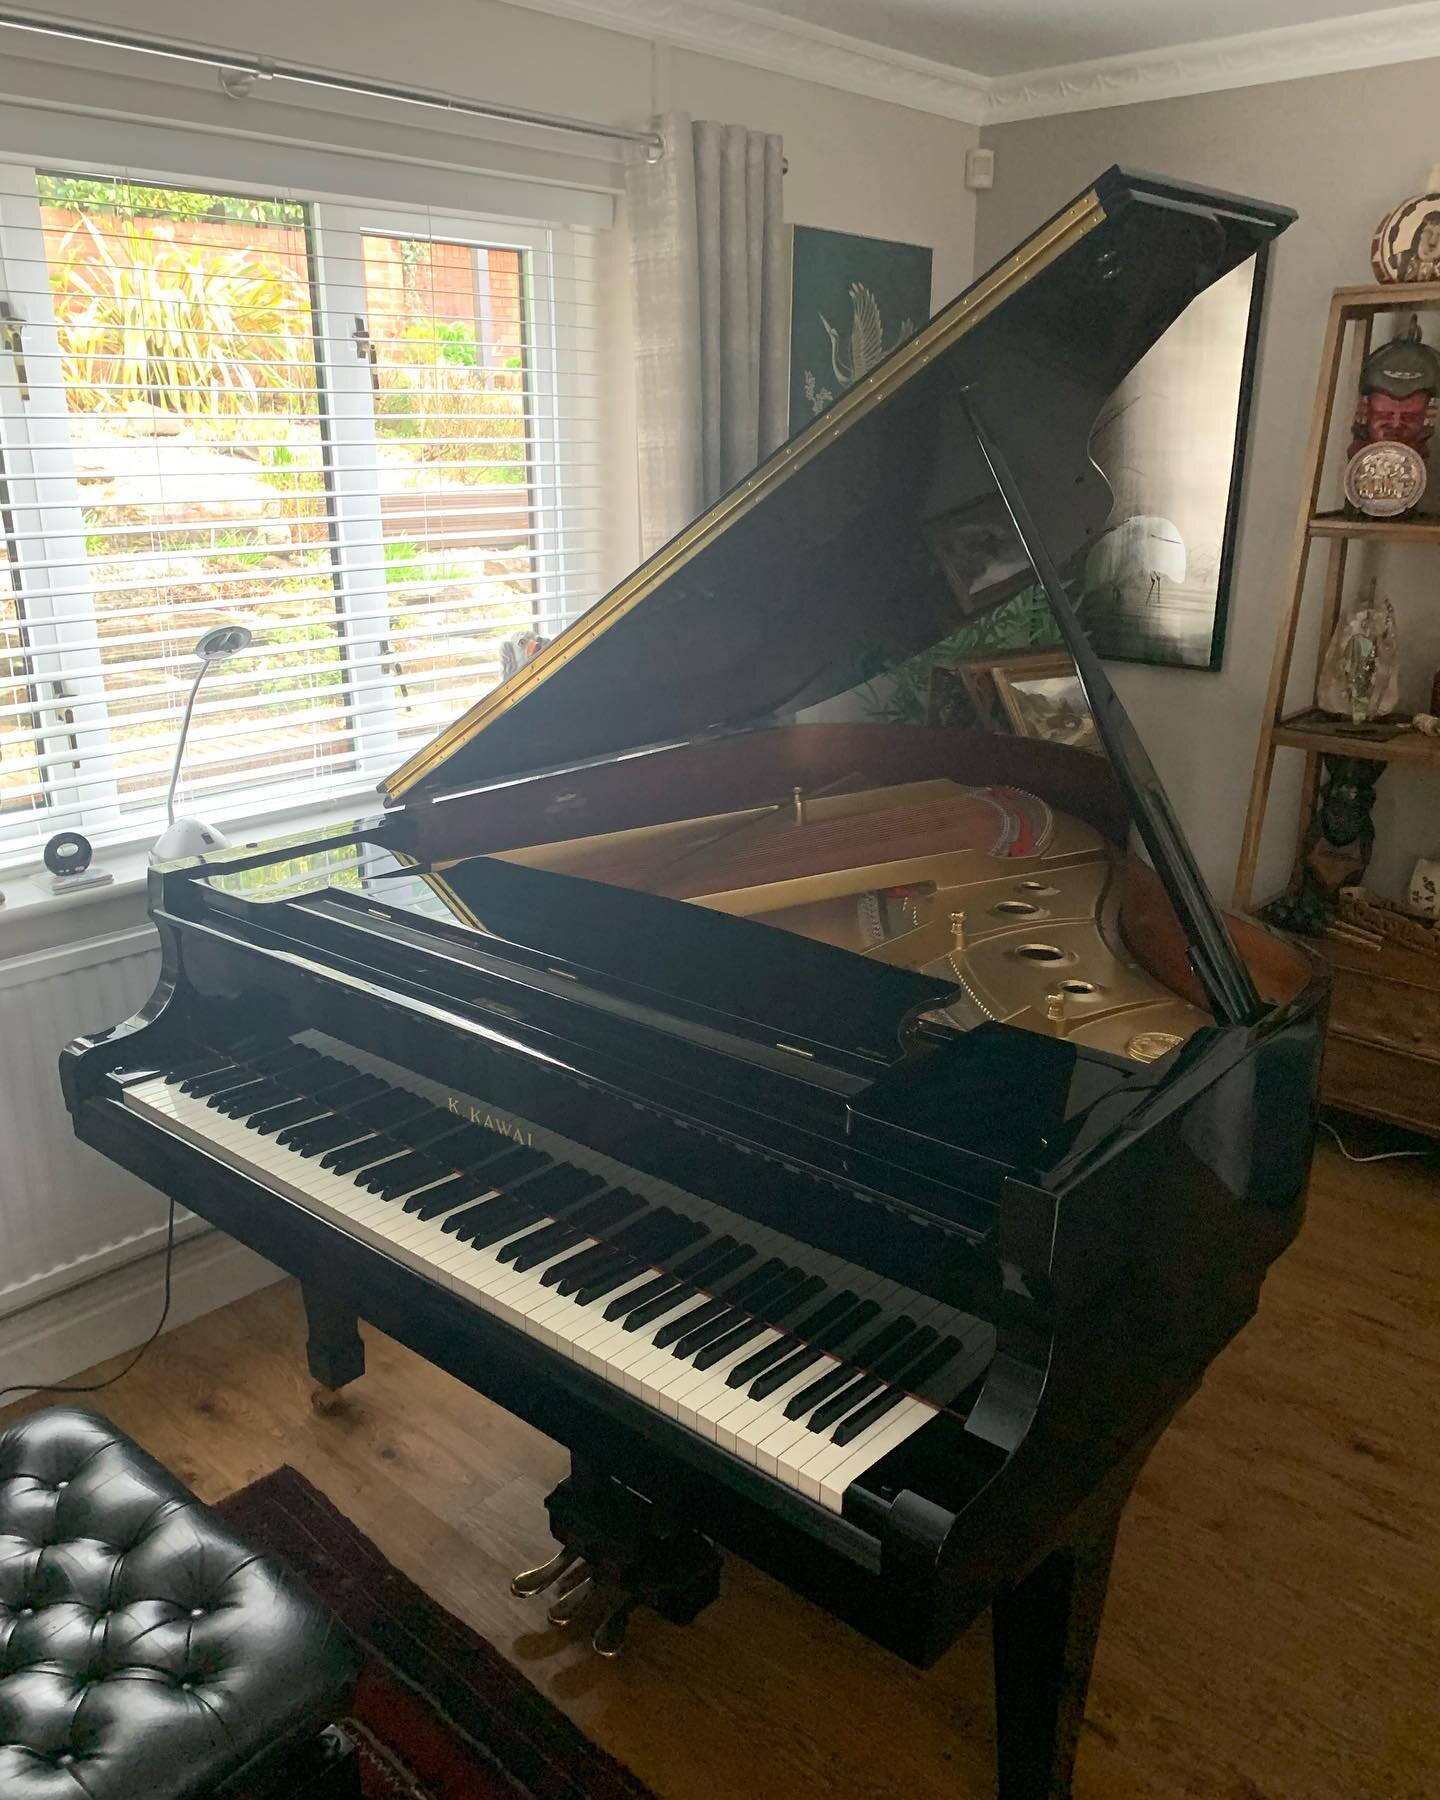 Wonderful Kawai RX3 in Aberdare yesterday&hellip;a real gem. Some people know how to live! 😎🎹

https://www.finetunepiano.co.uk